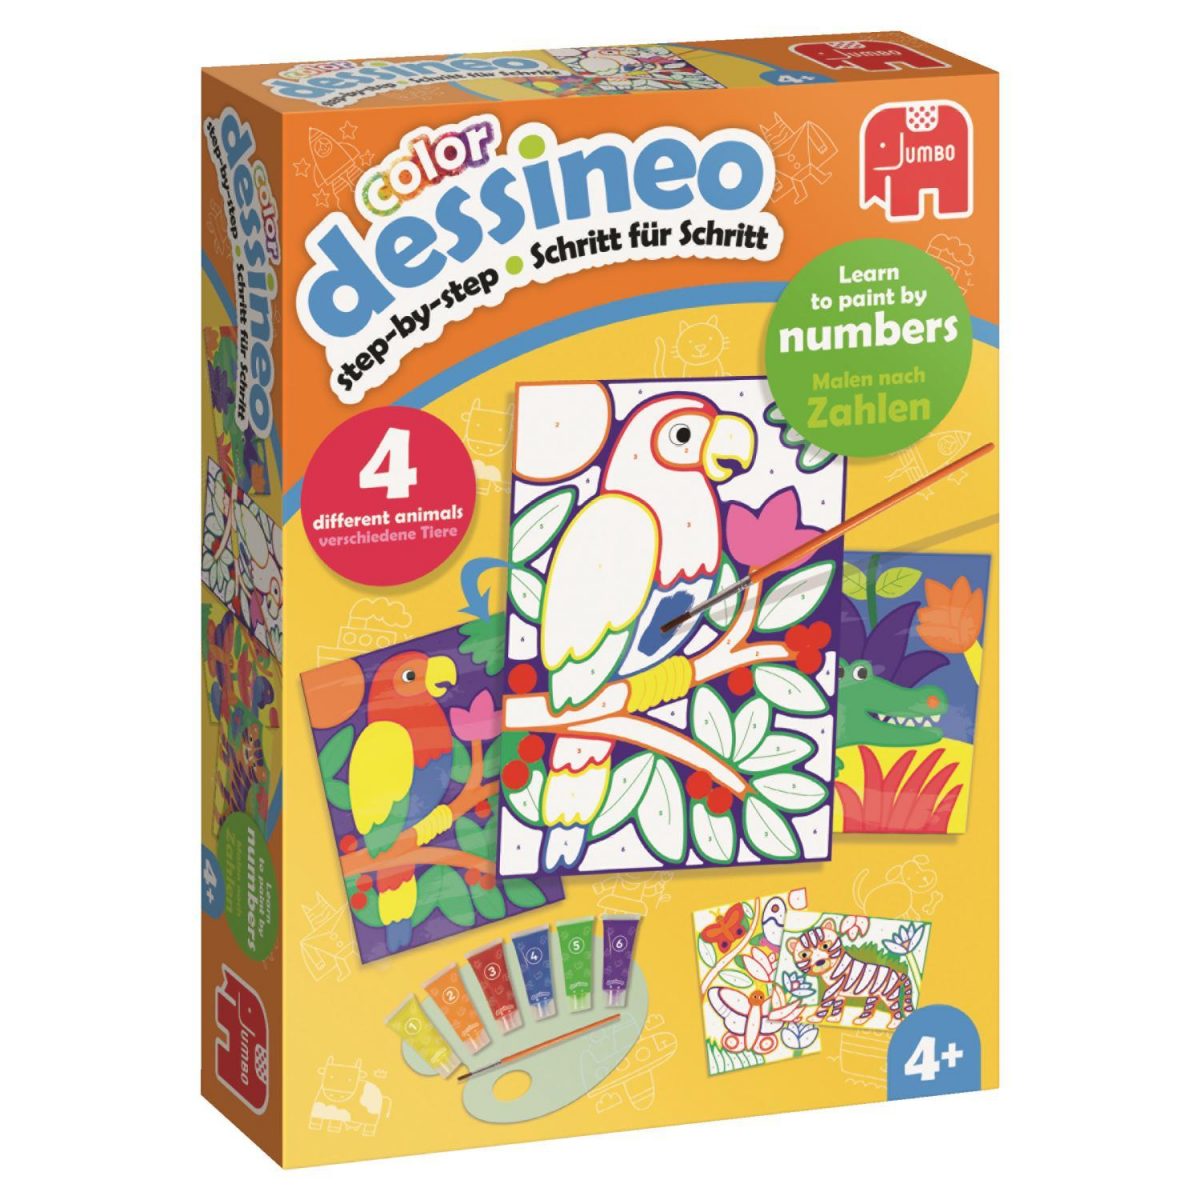 Dessineo Learn to Paint by Numbers